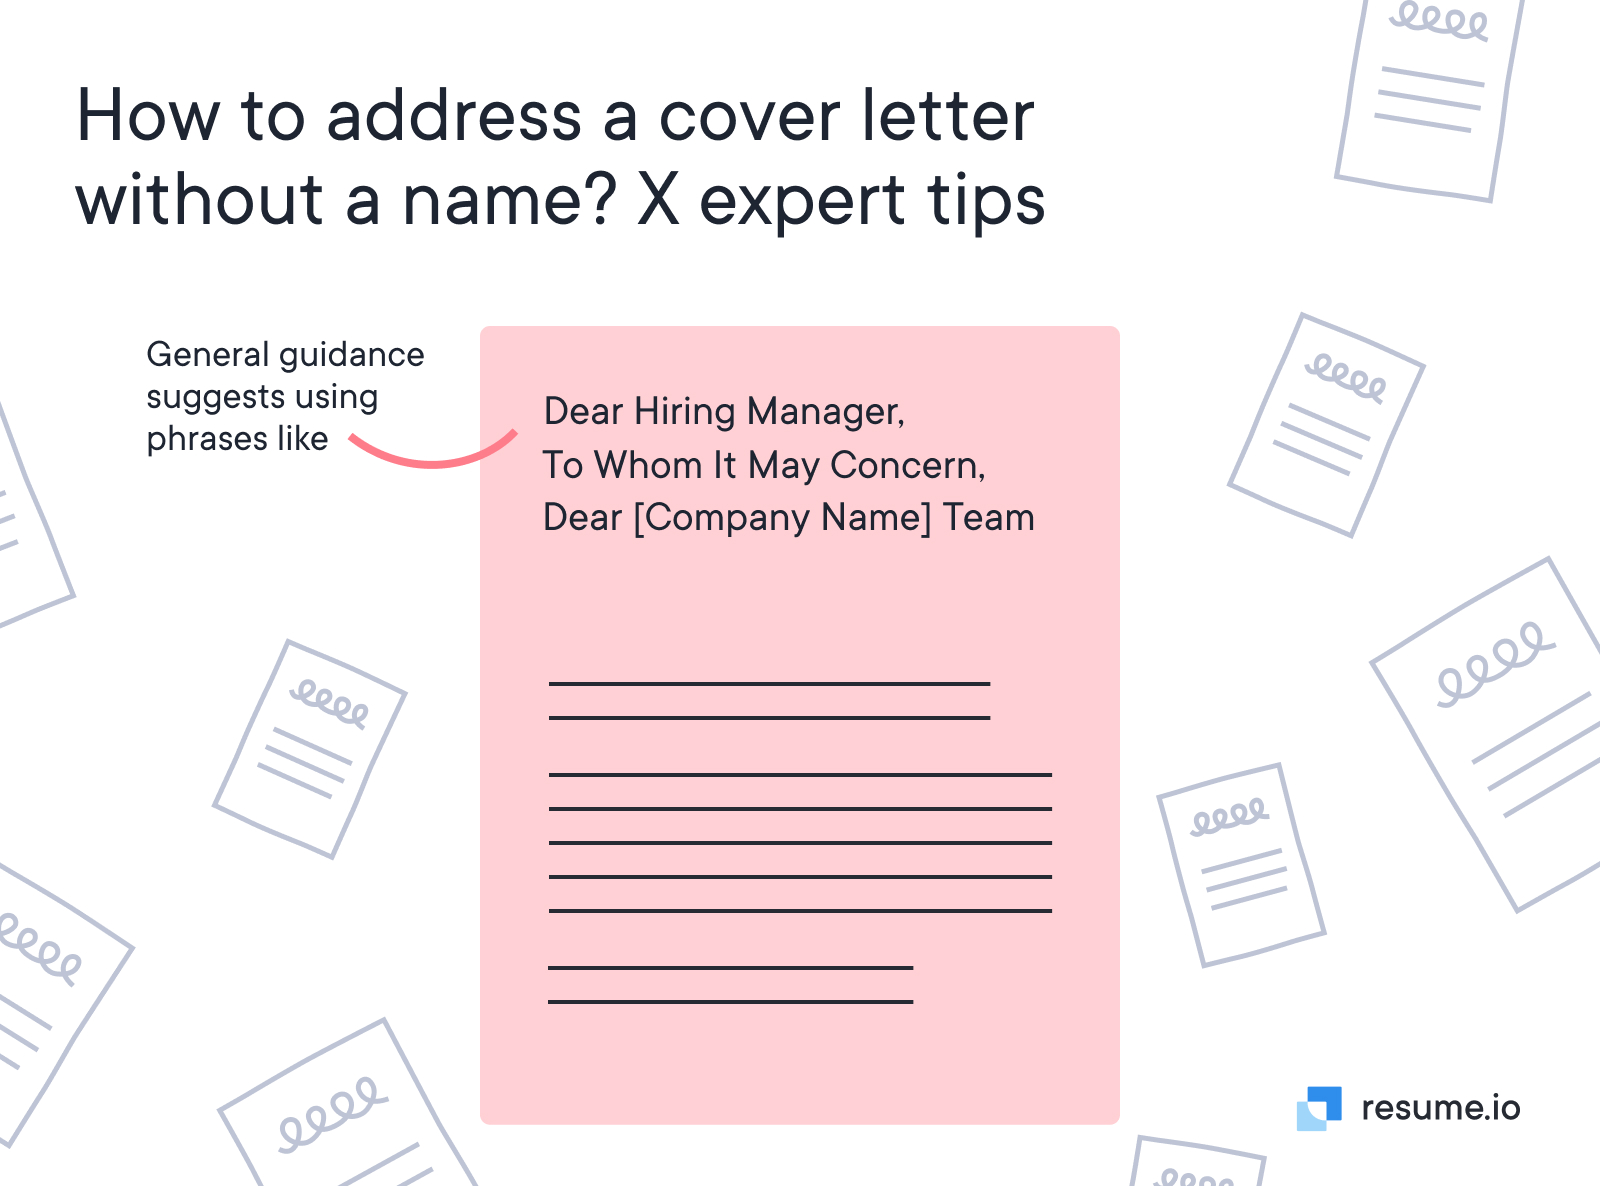 How to address a cover letter without a name?